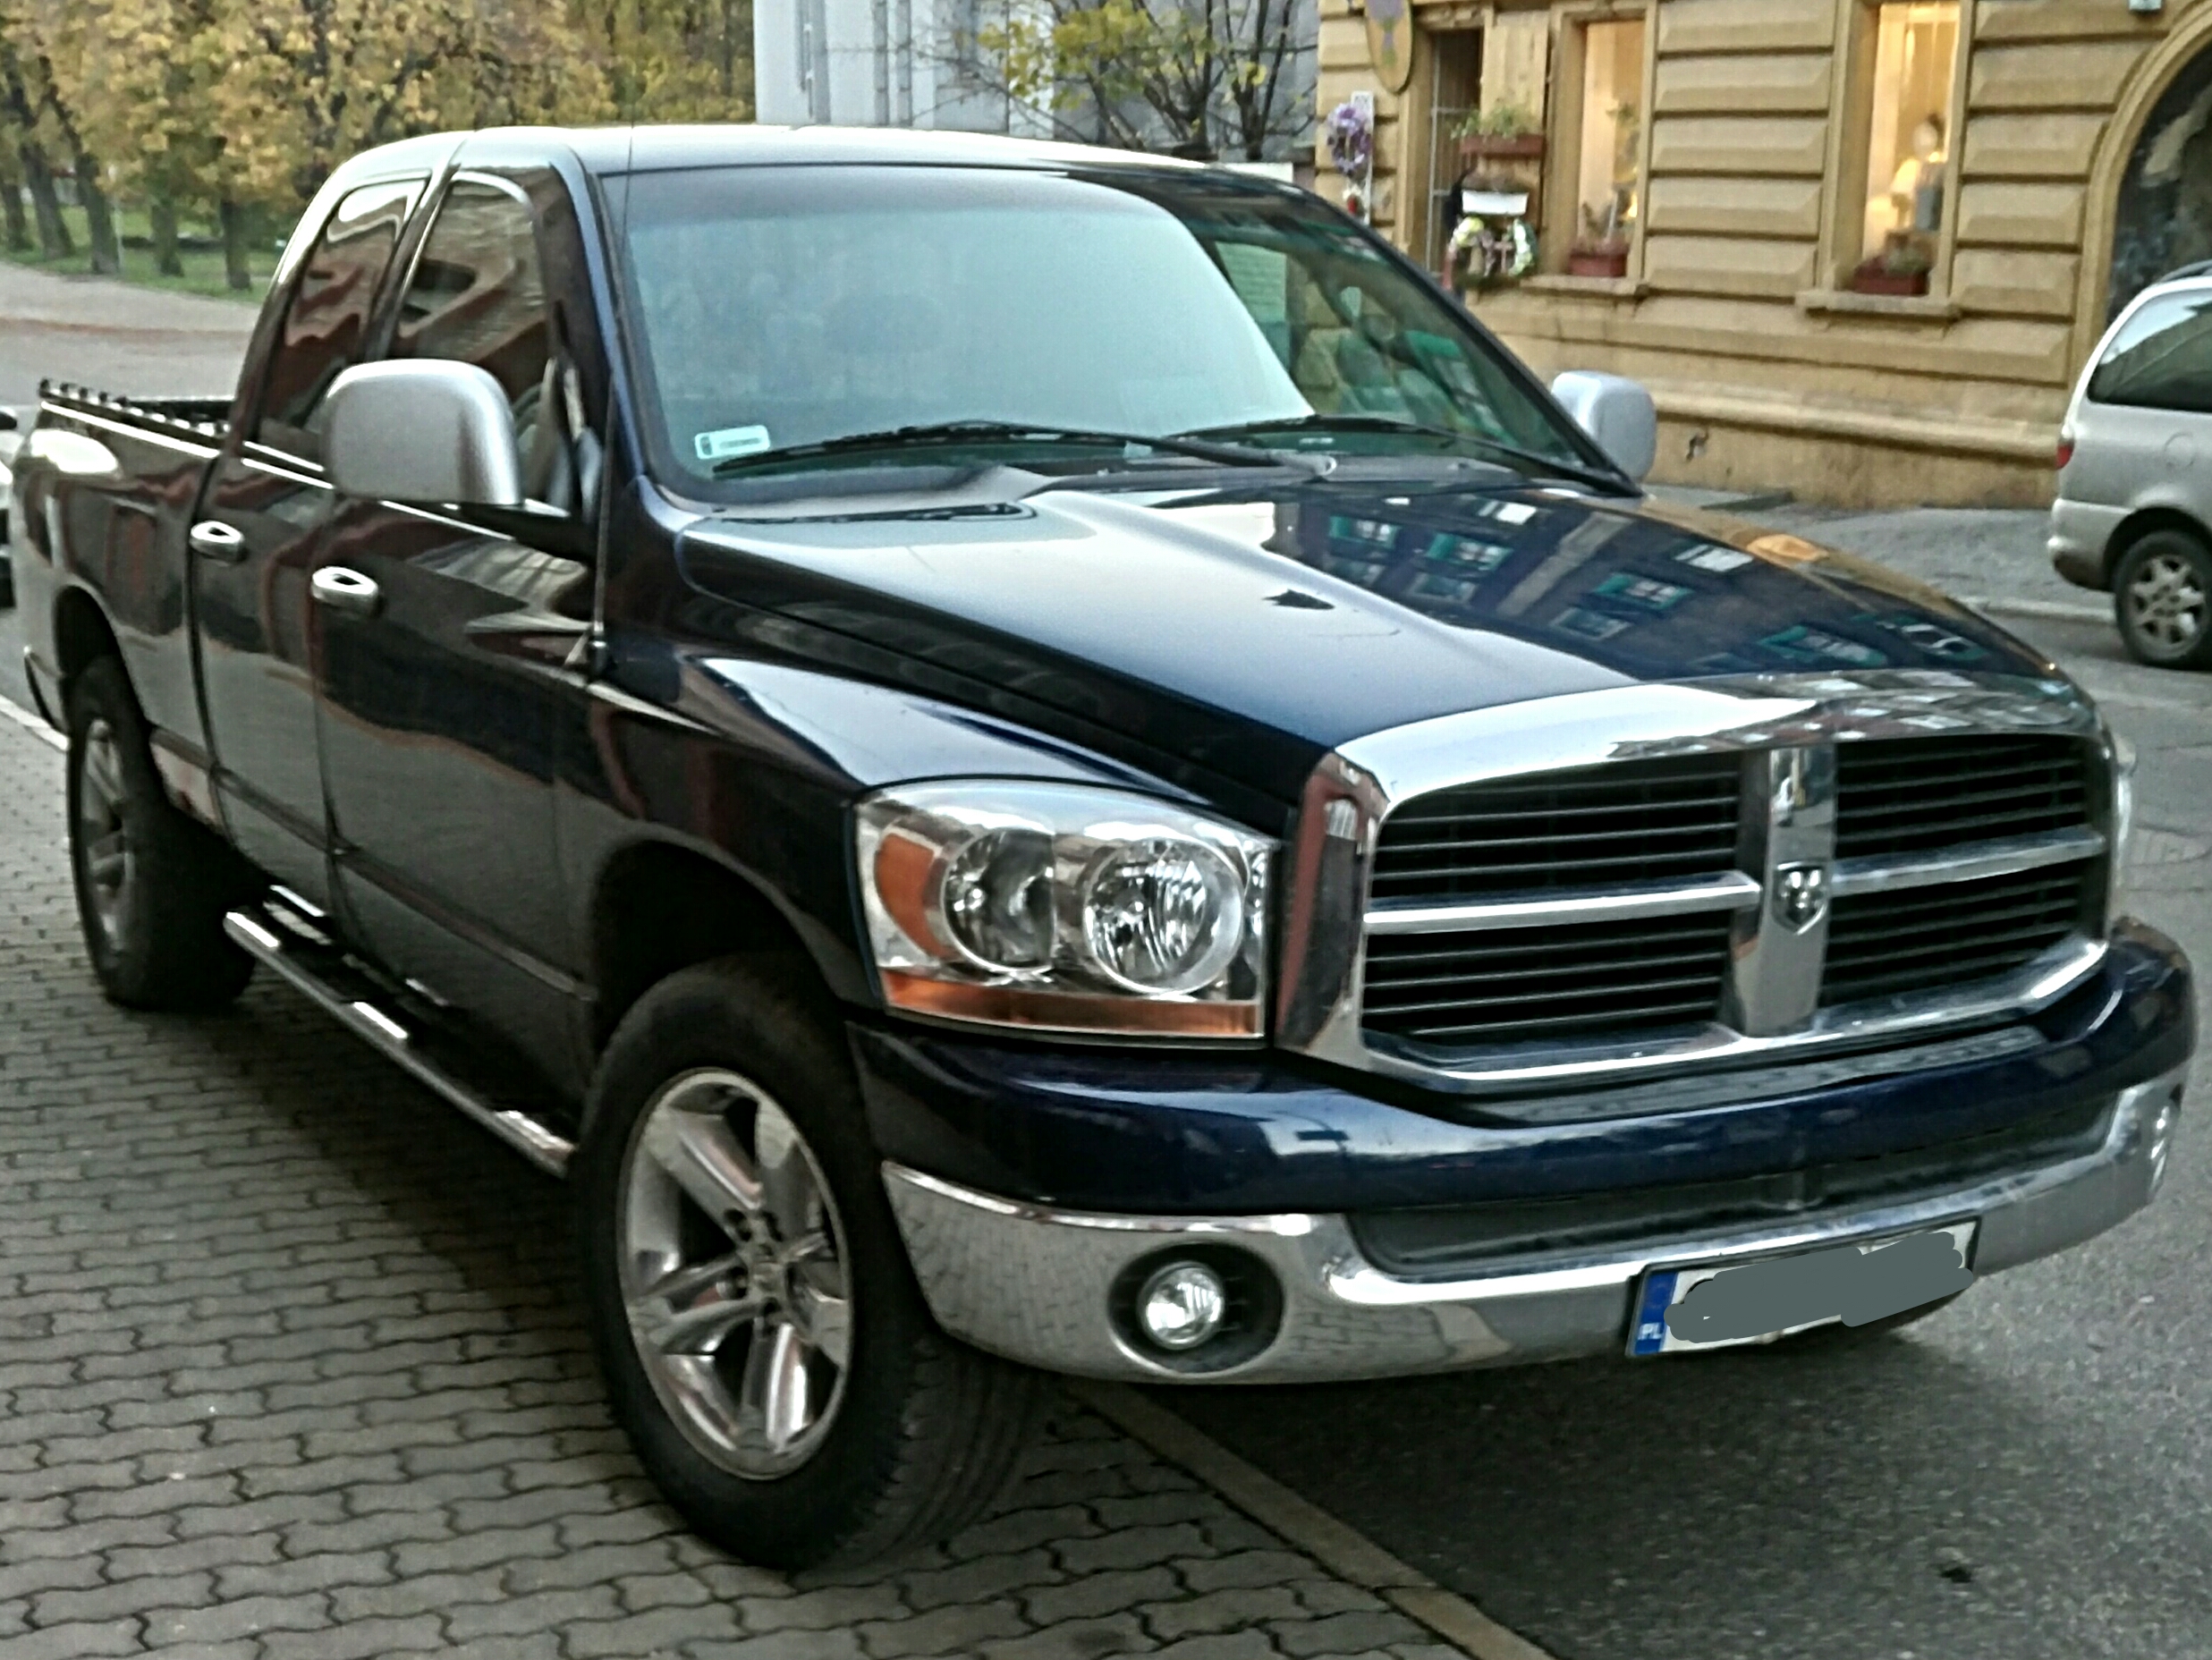 2008 Dodge Ram 1500 Specifications, Pricing, Pictures and Videos